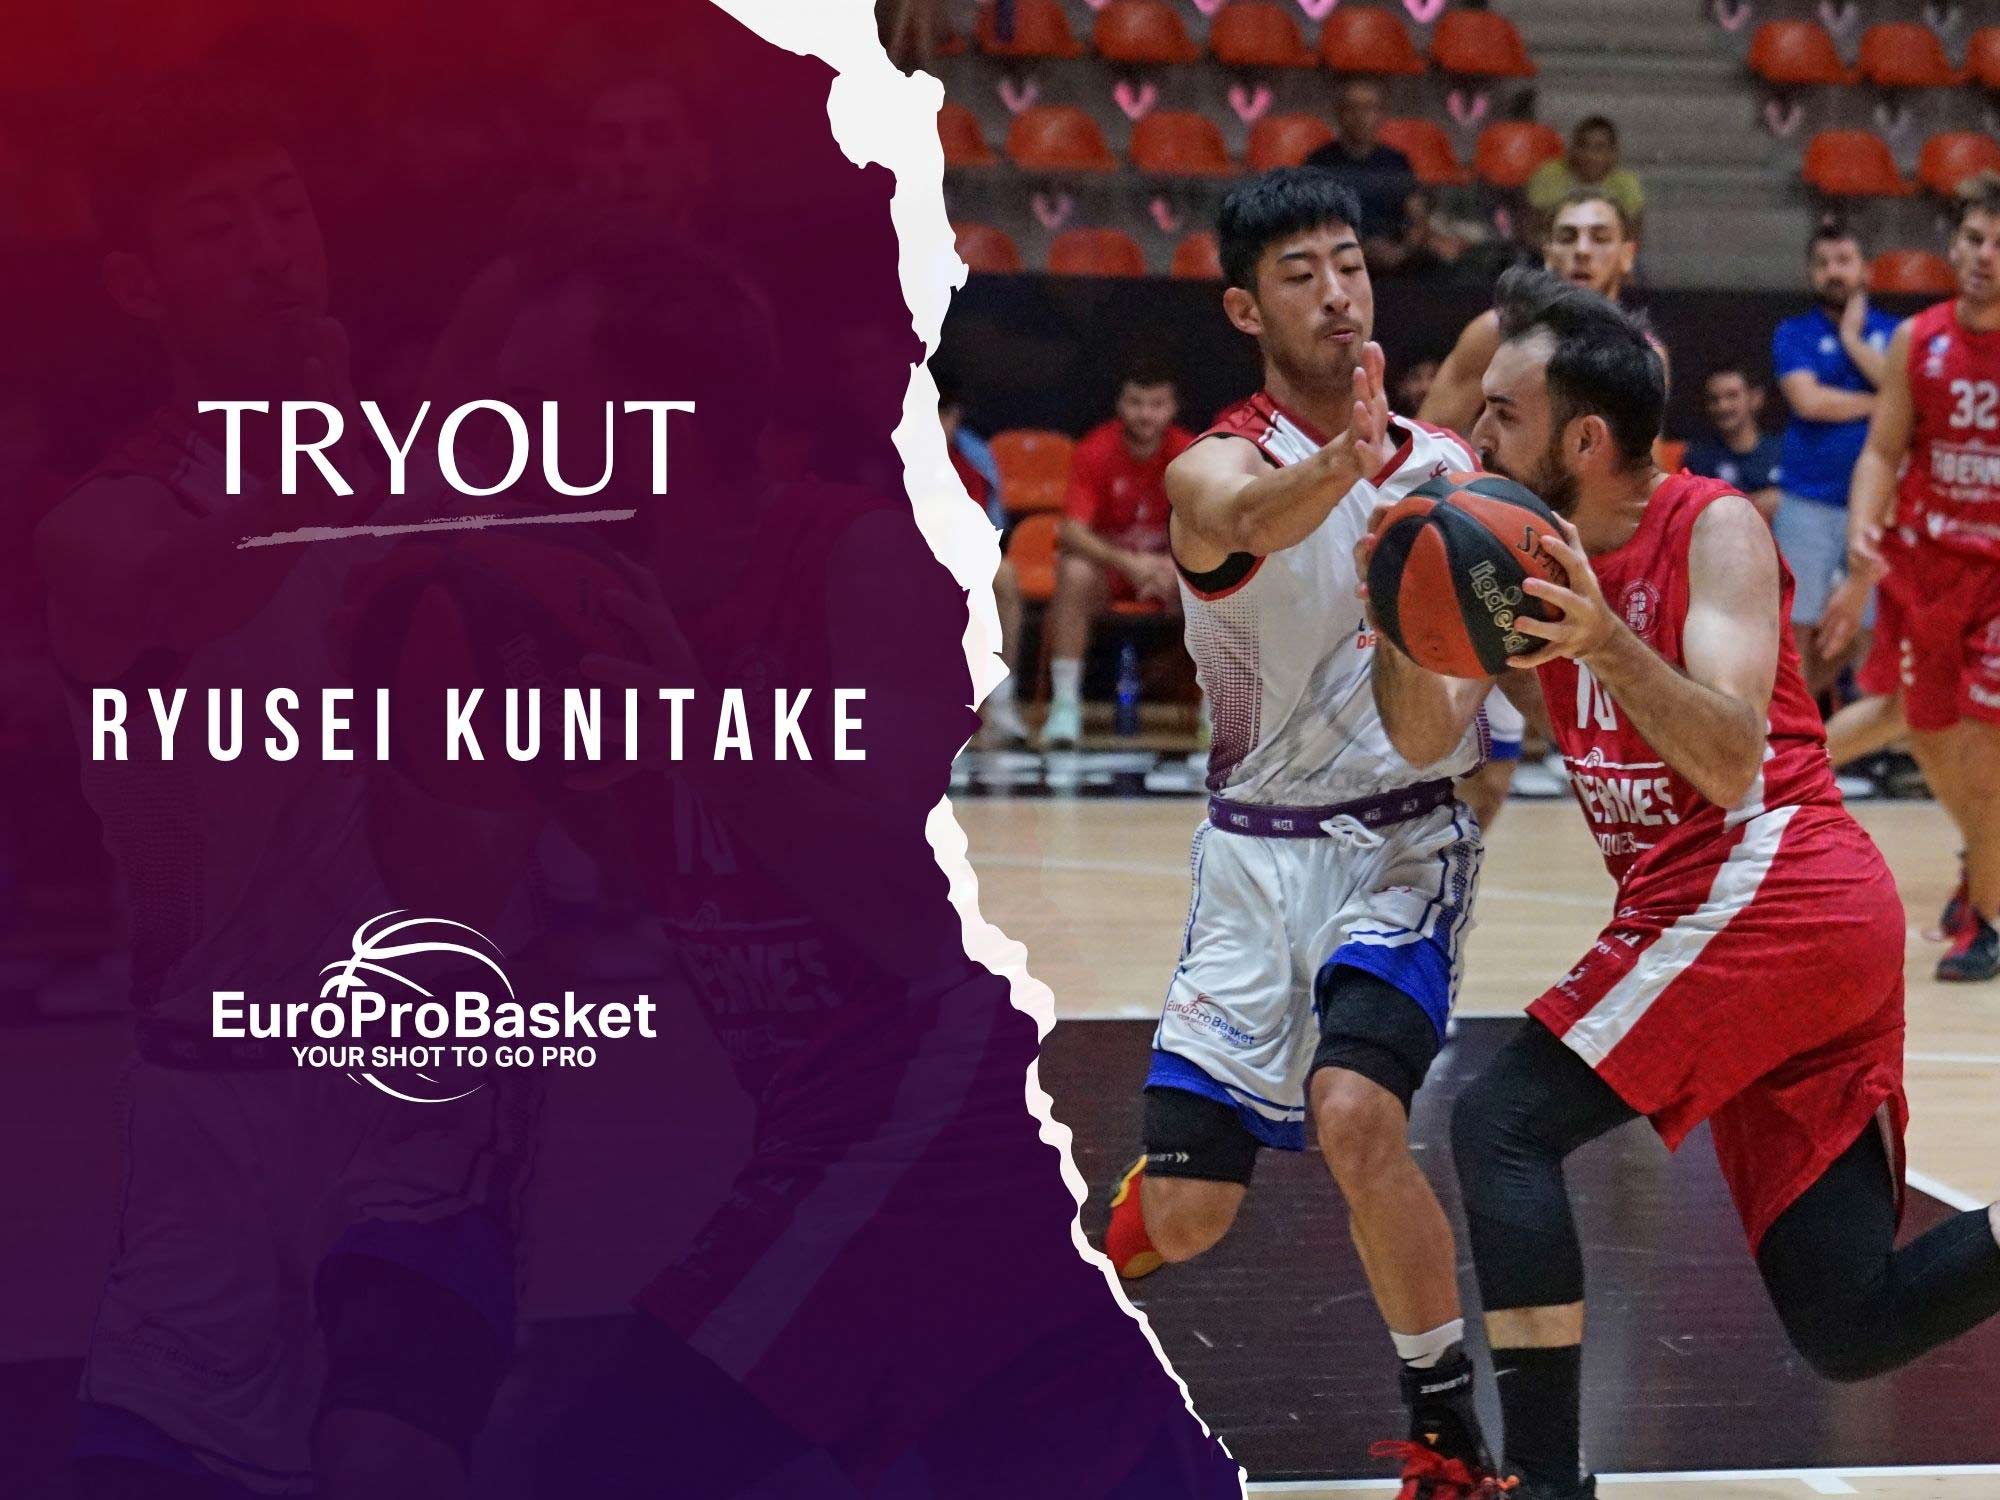 EuroProBasket Player on Tryout in Spain